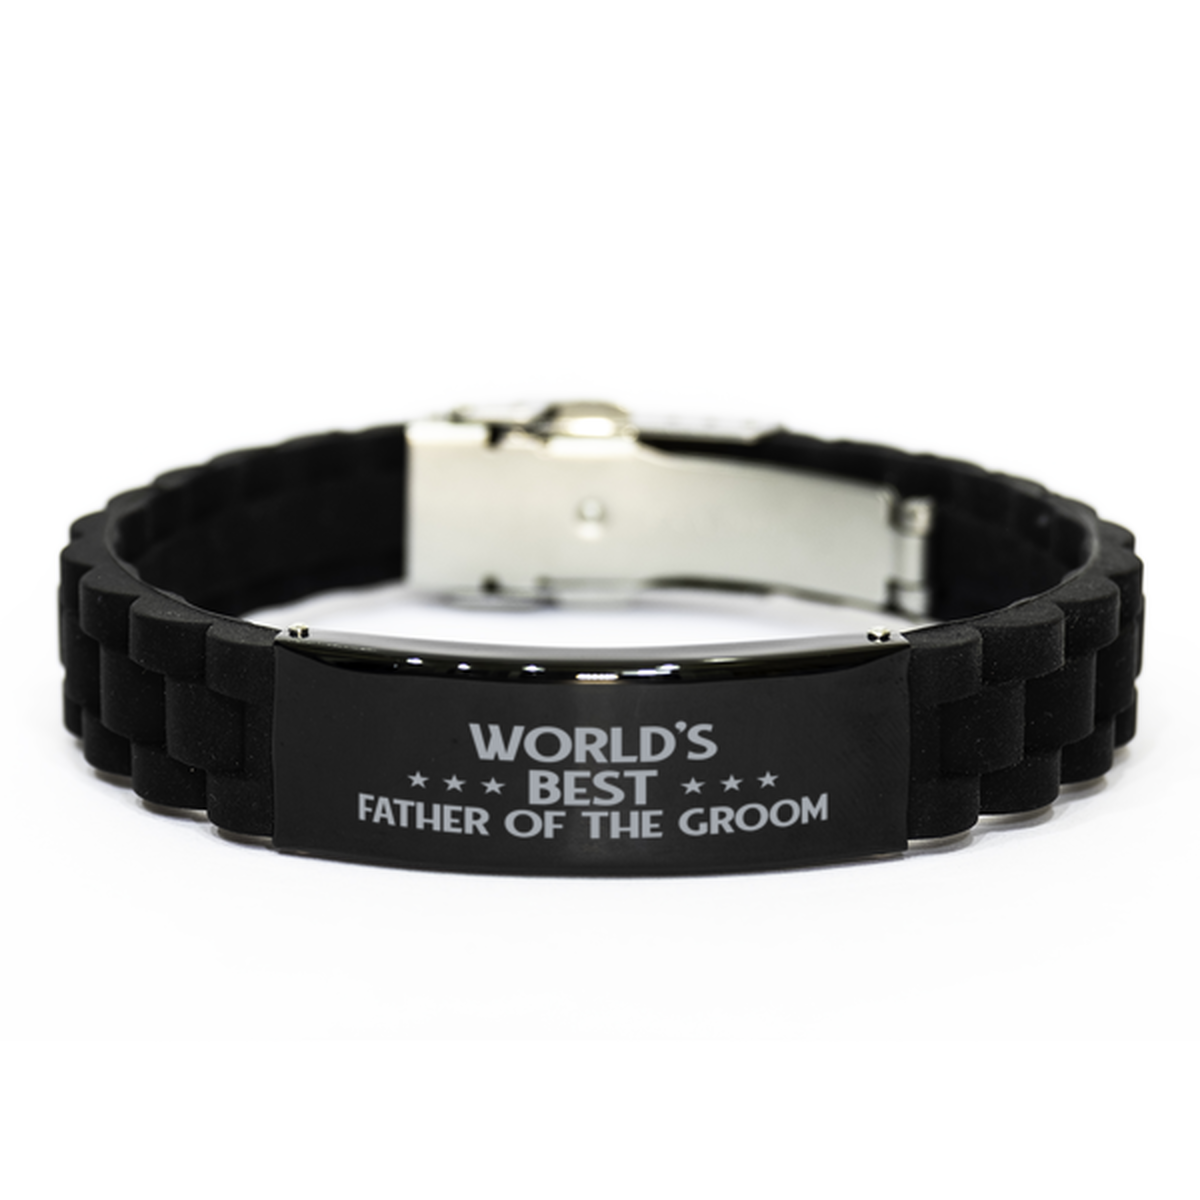 World's Best Father of the groom Gifts, Funny Black Engraved Bracelet For Father of the groom, Family Gifts For Men